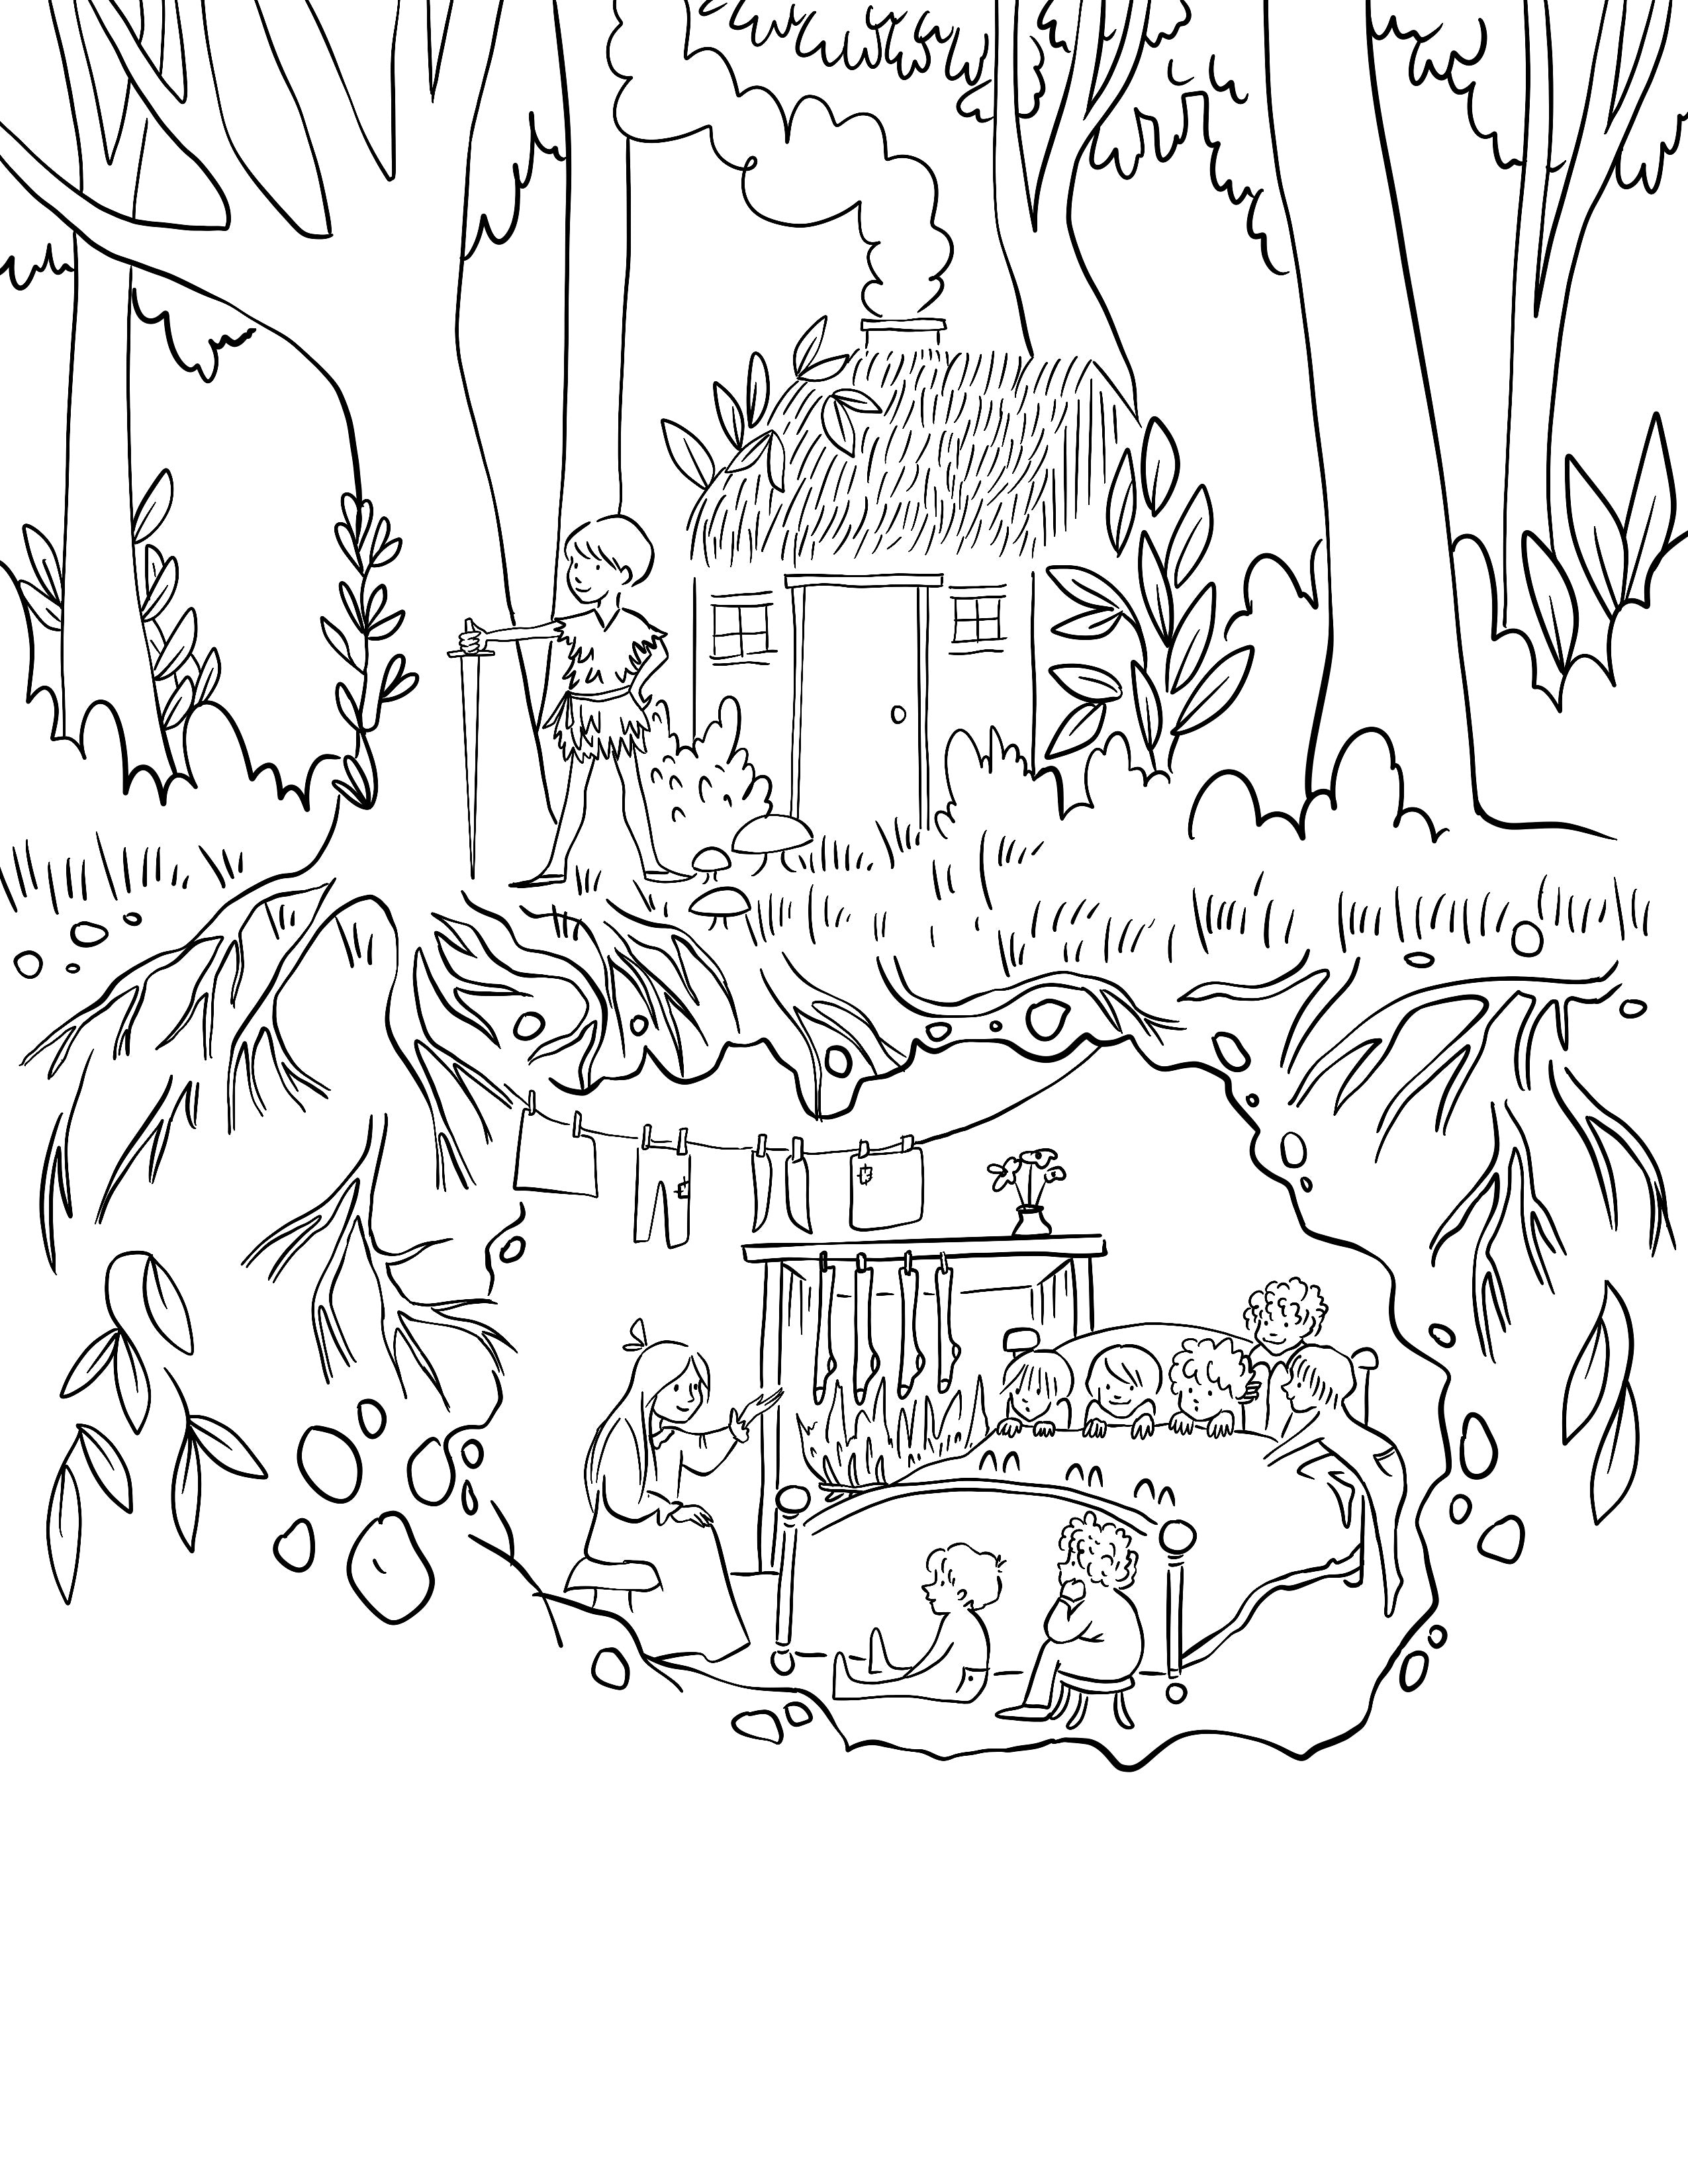 Single coloring page